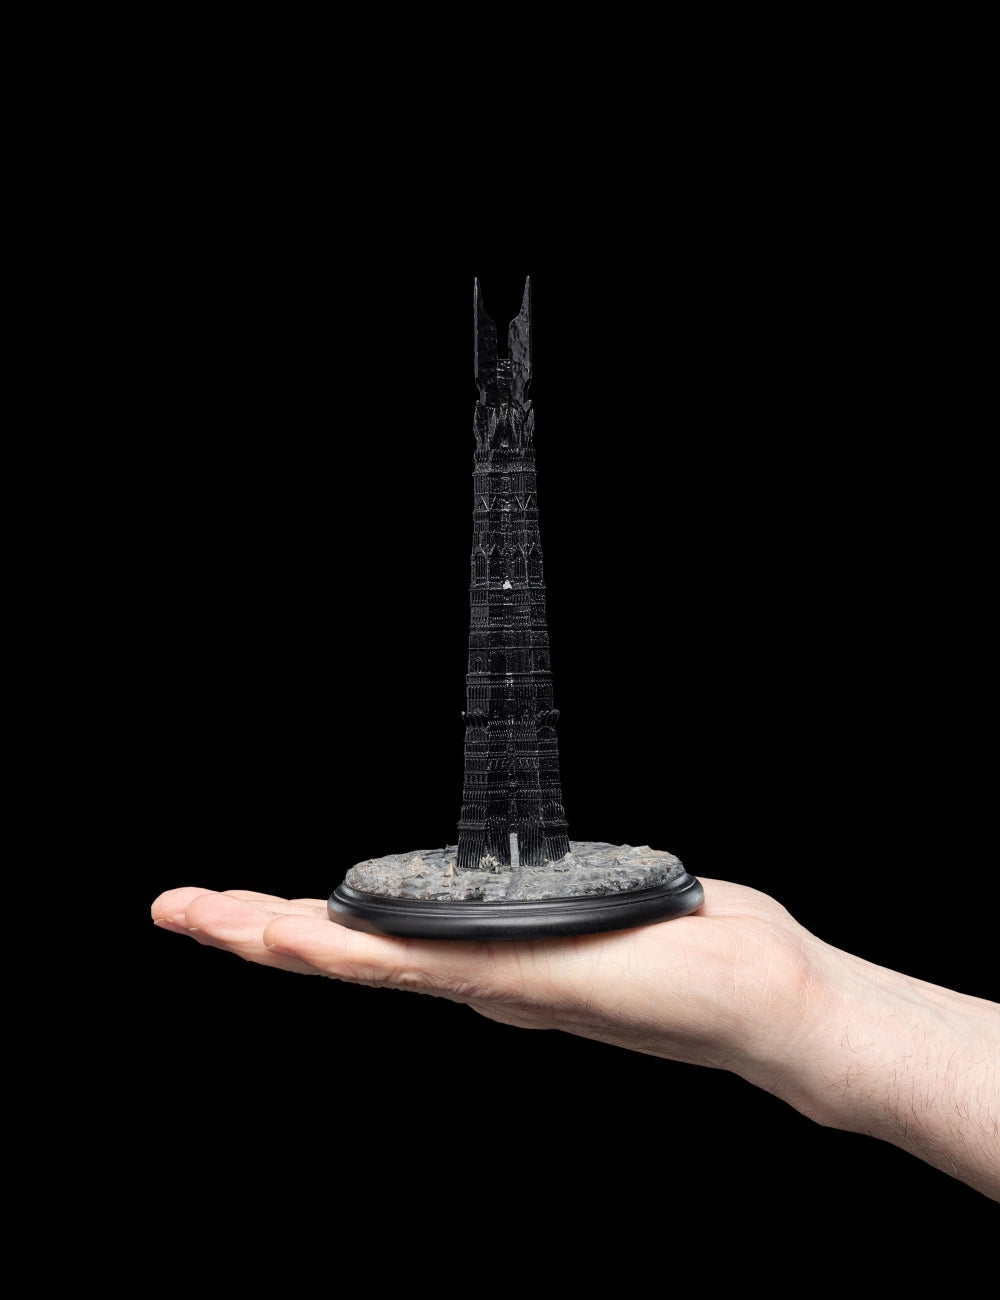 Tower of Orthanc, Saruman's Tower (The Lord of the Rings) Mini Environment Statue by Weta Workshop